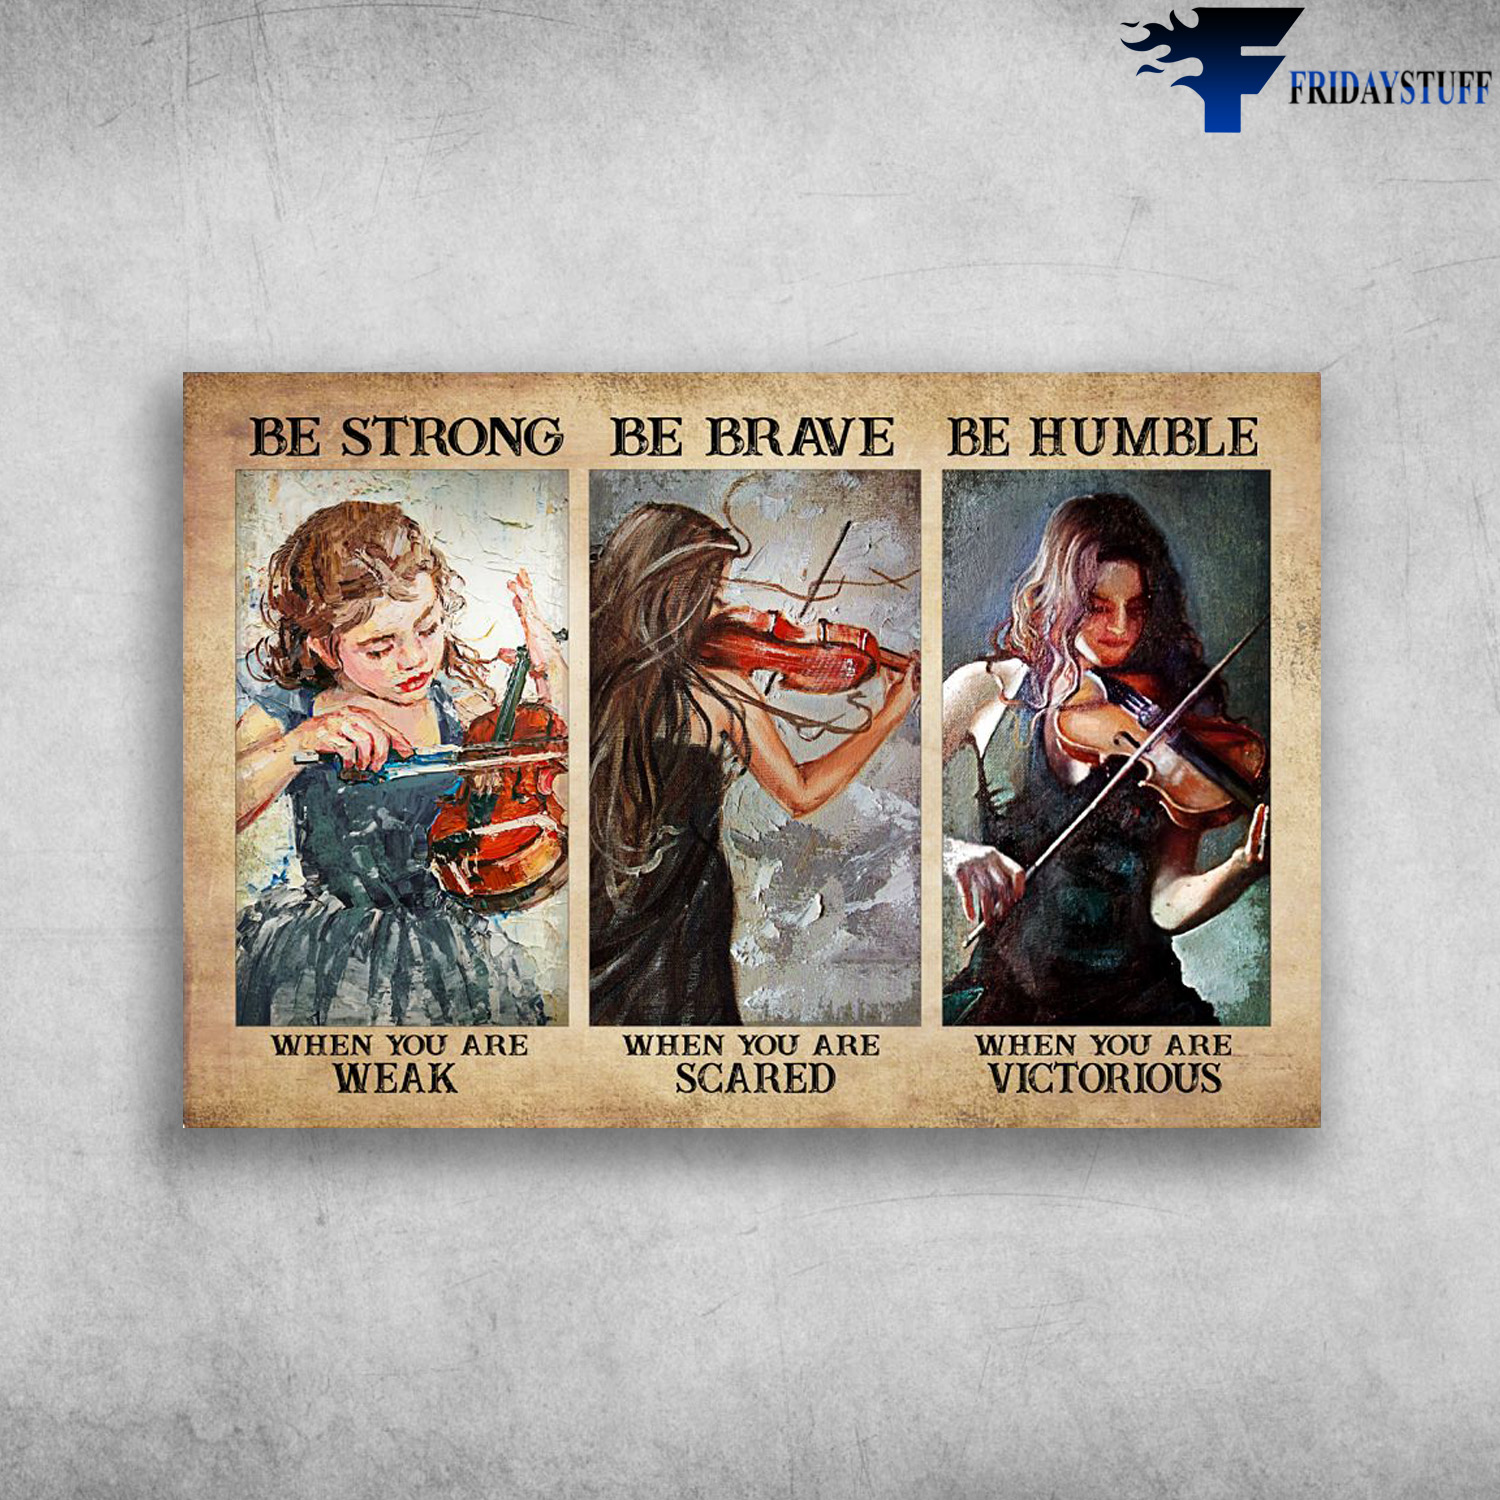 Girl Playing Violon - Be Strong When You Are Weak, Be Brave When You Are Scared, Be Humble When You Are Victorious